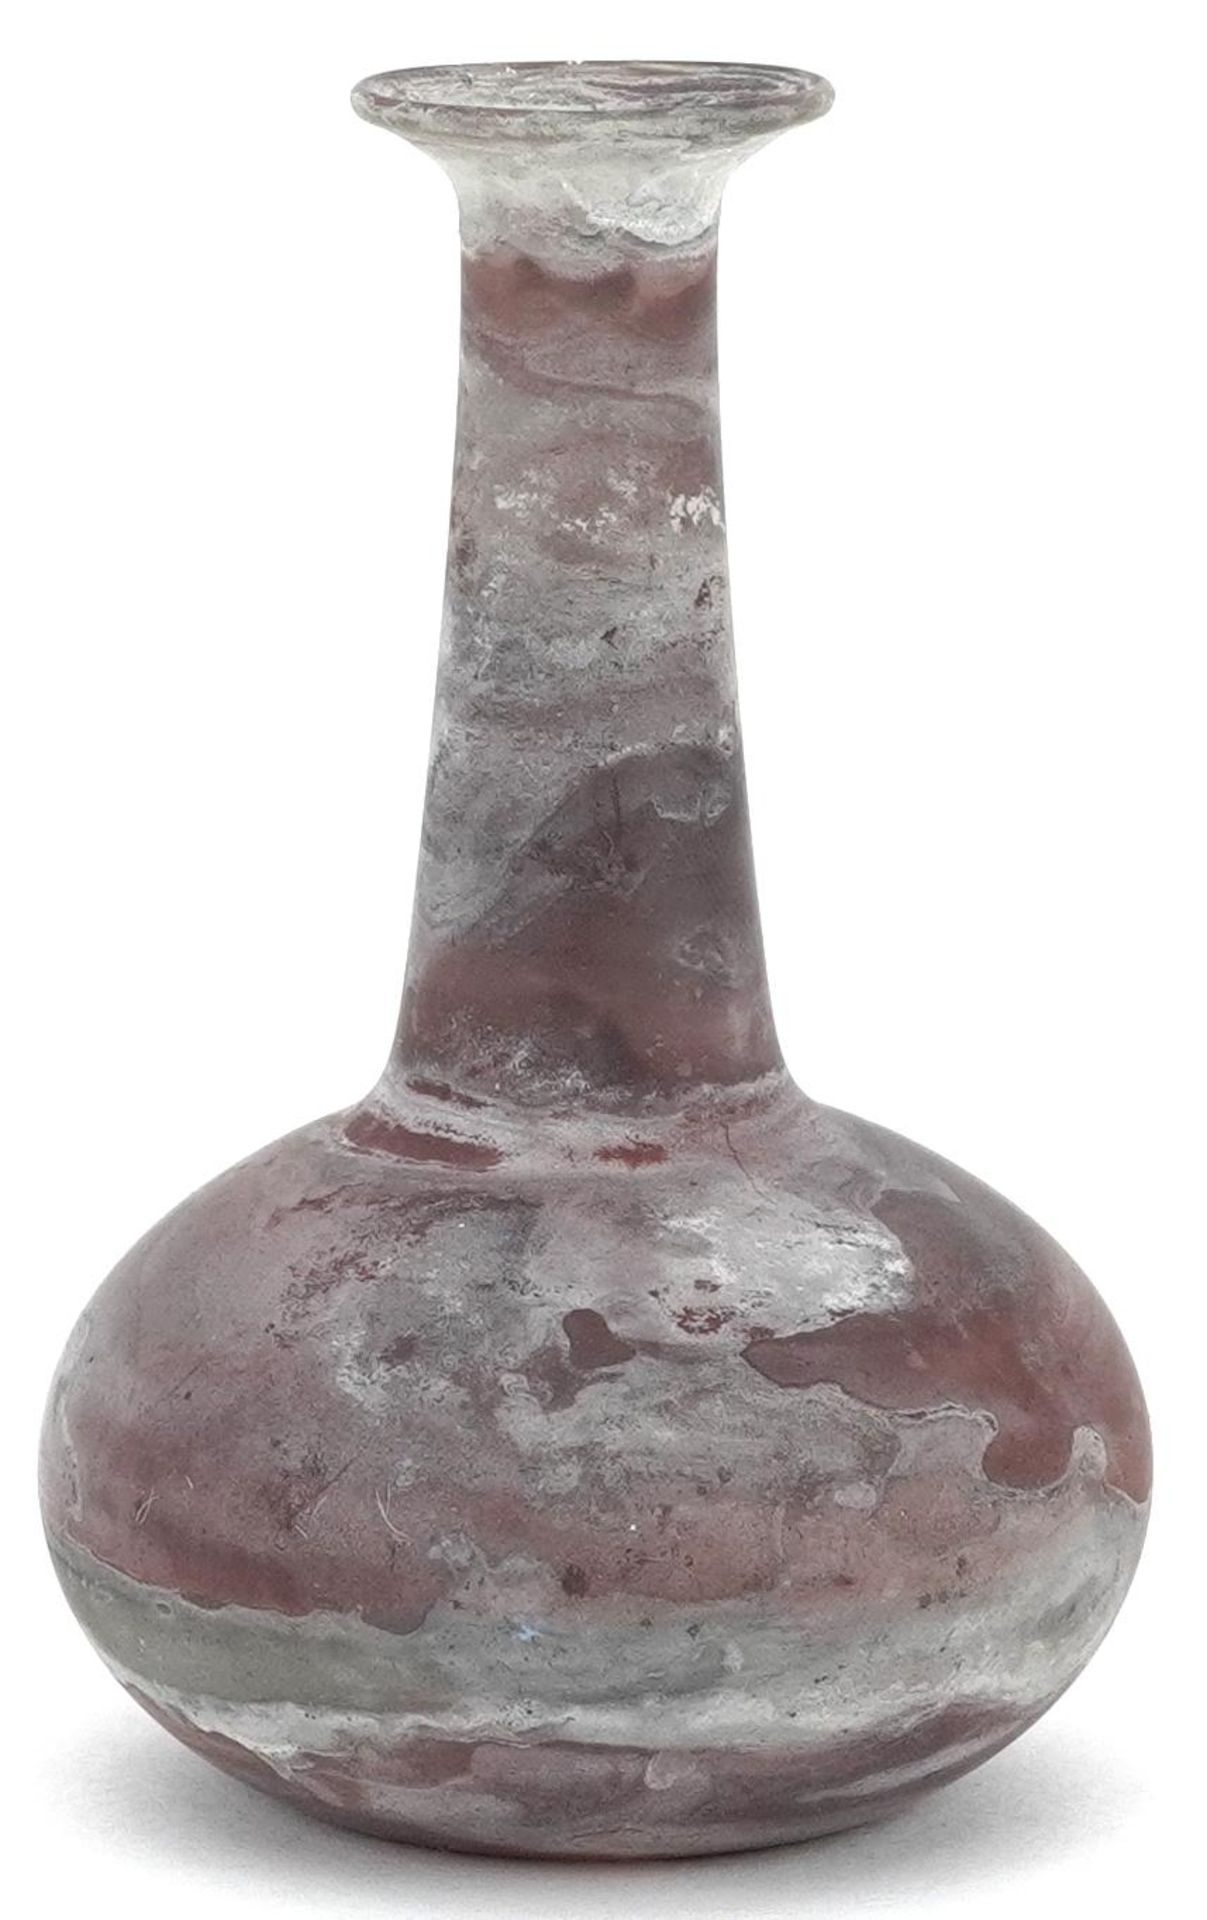 Antique marbleised glass vase, probably Roman, Old Collection inscription to the base, 7.5cm high - Image 2 of 3